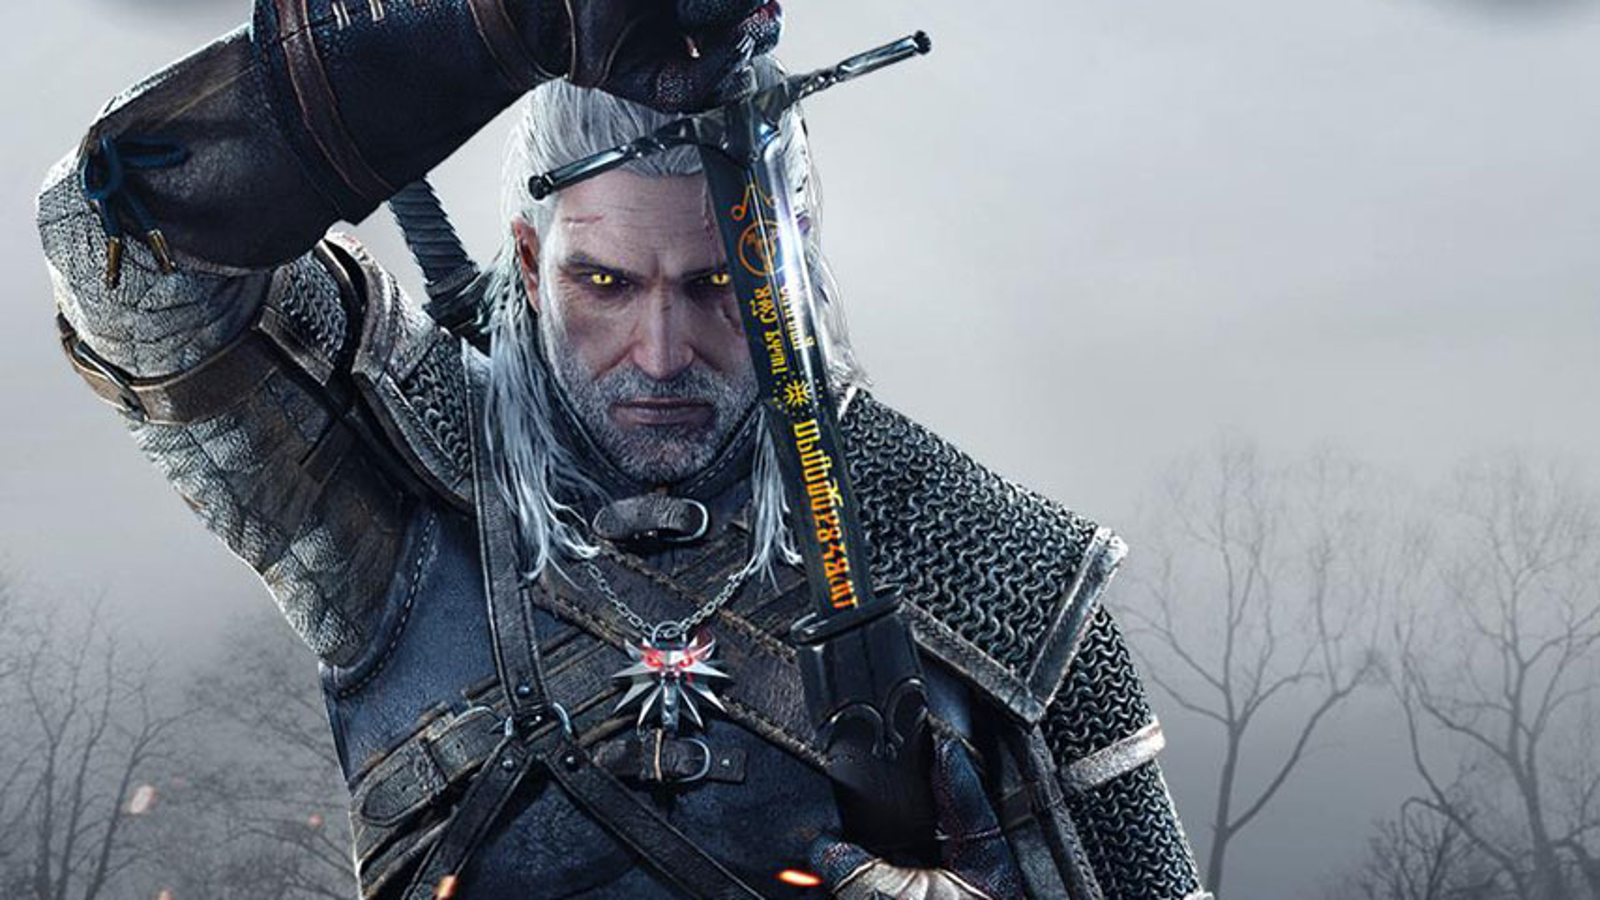 The Witcher 3: Wild Hunt guide and walkthrough VG247